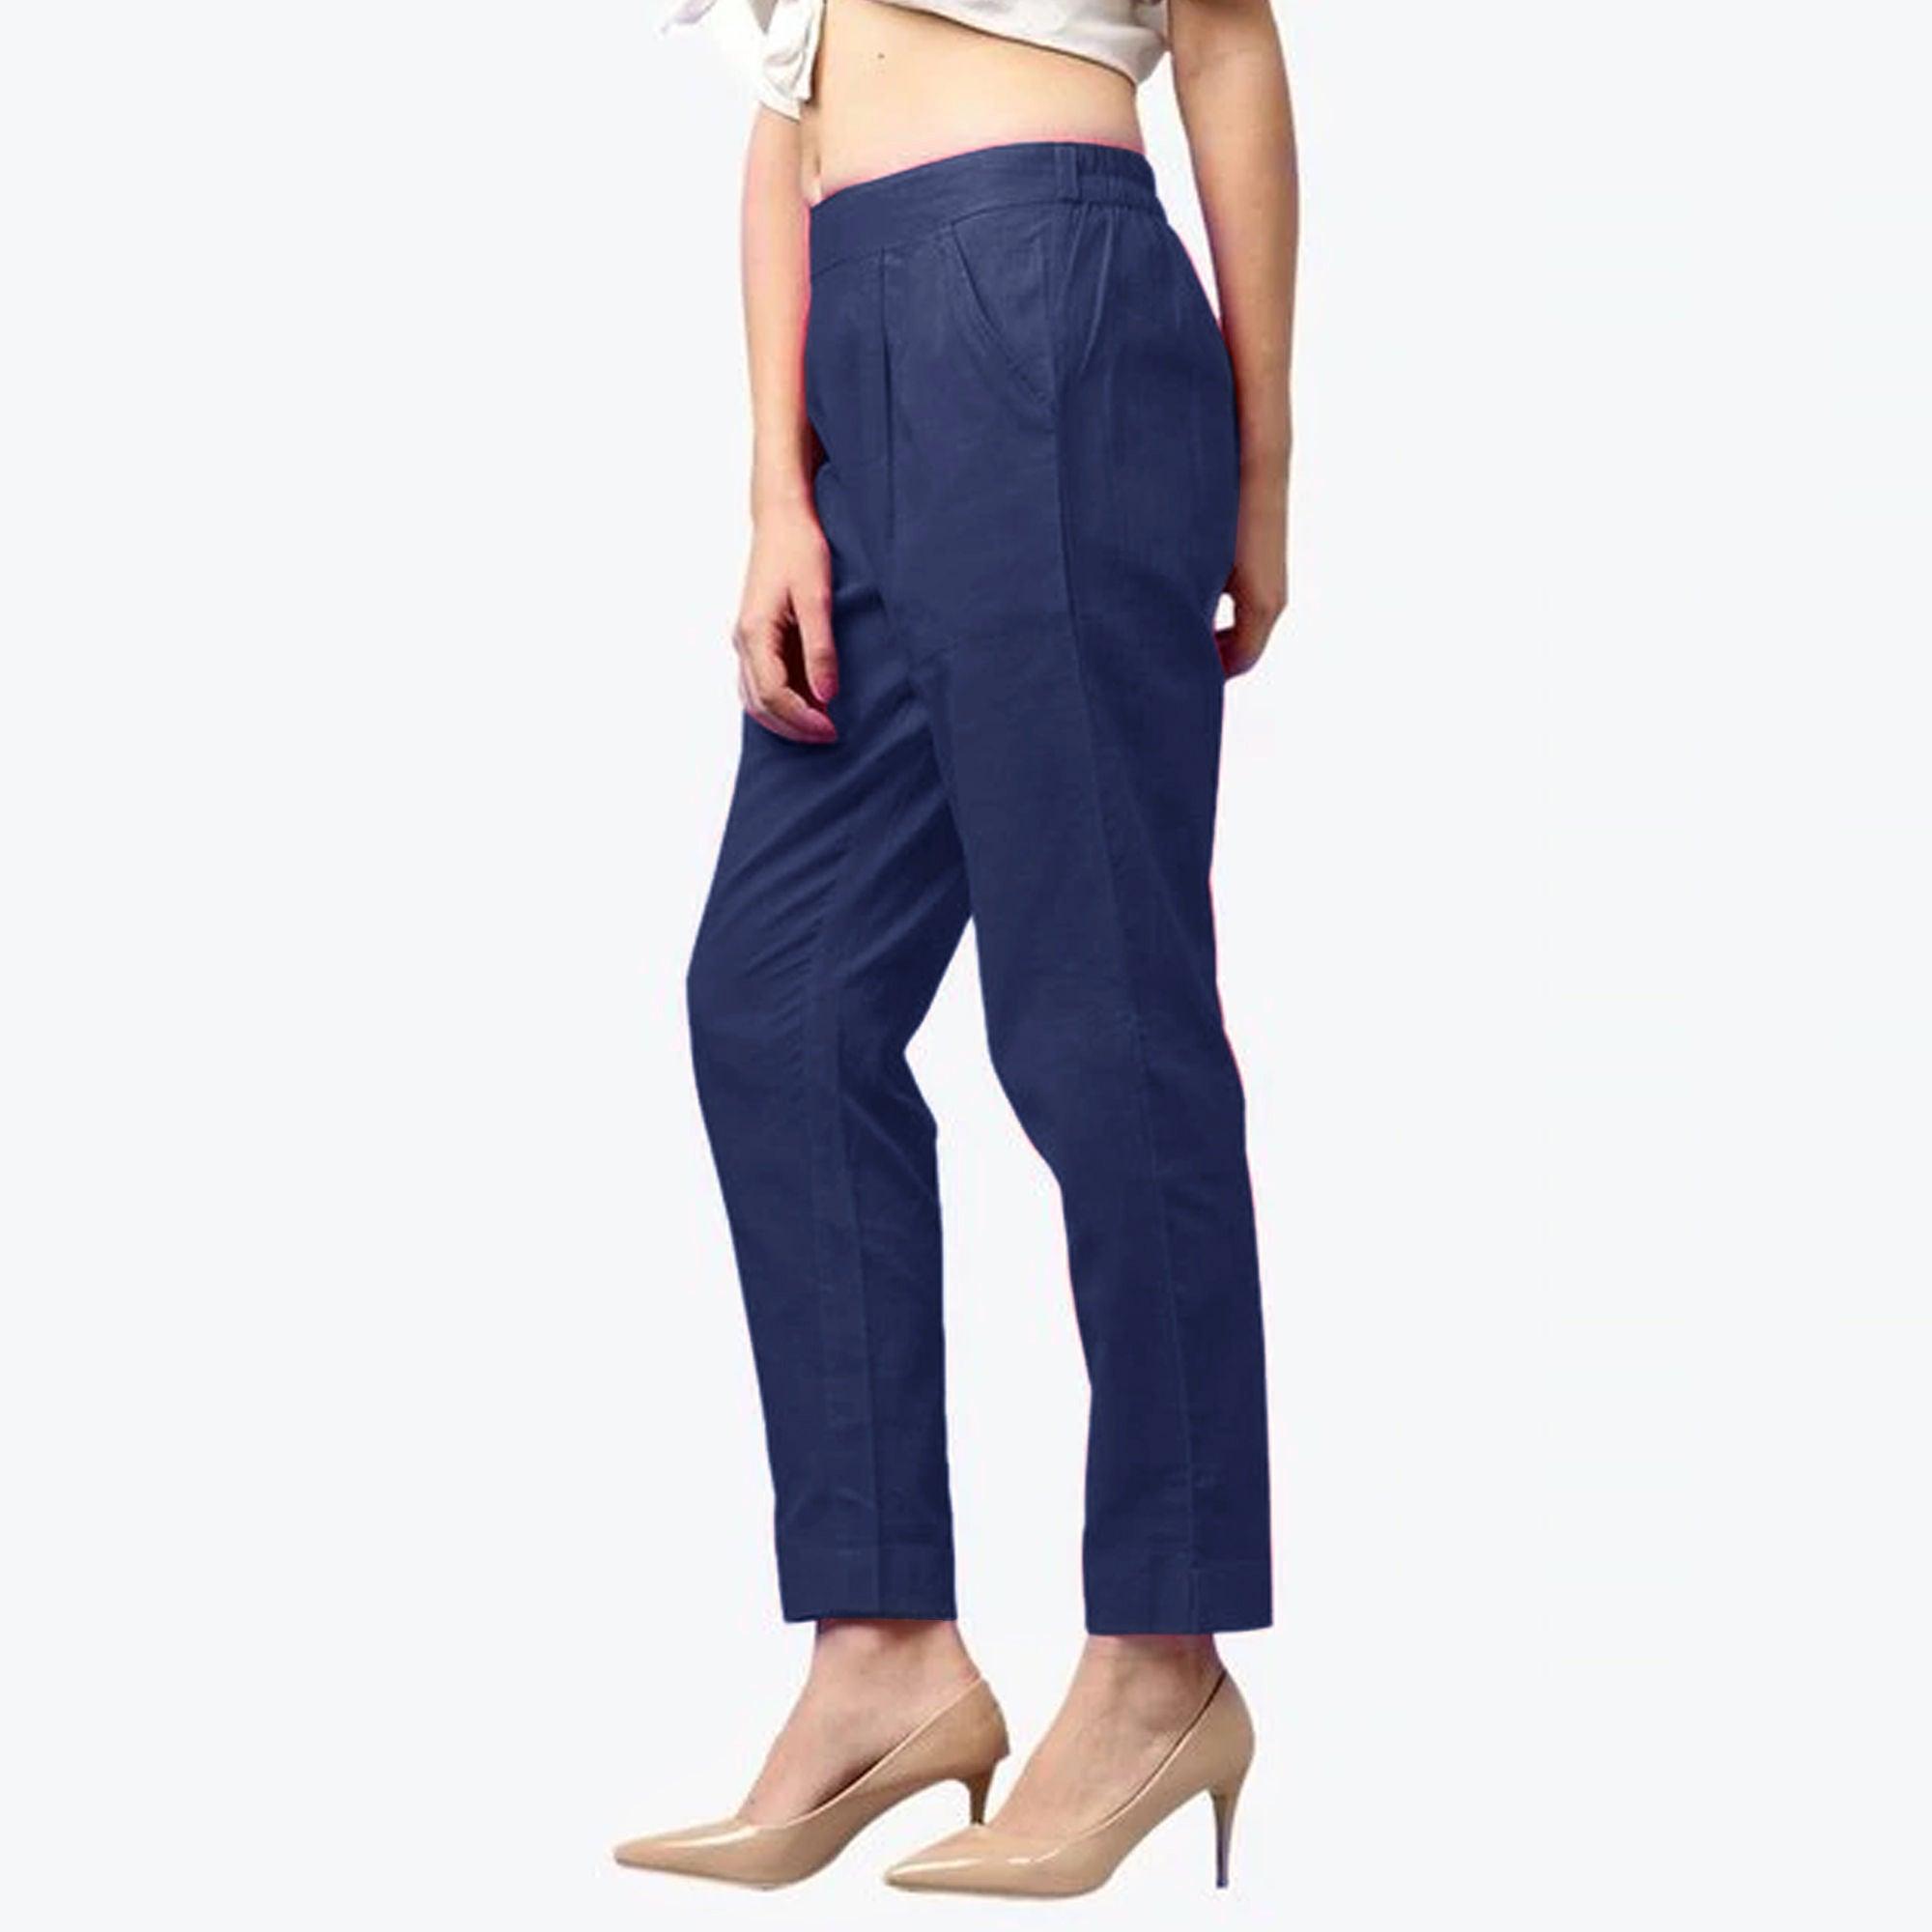 Breathtaking Navy Blue Colored Casual Wear Cotton Pant - Peachmode